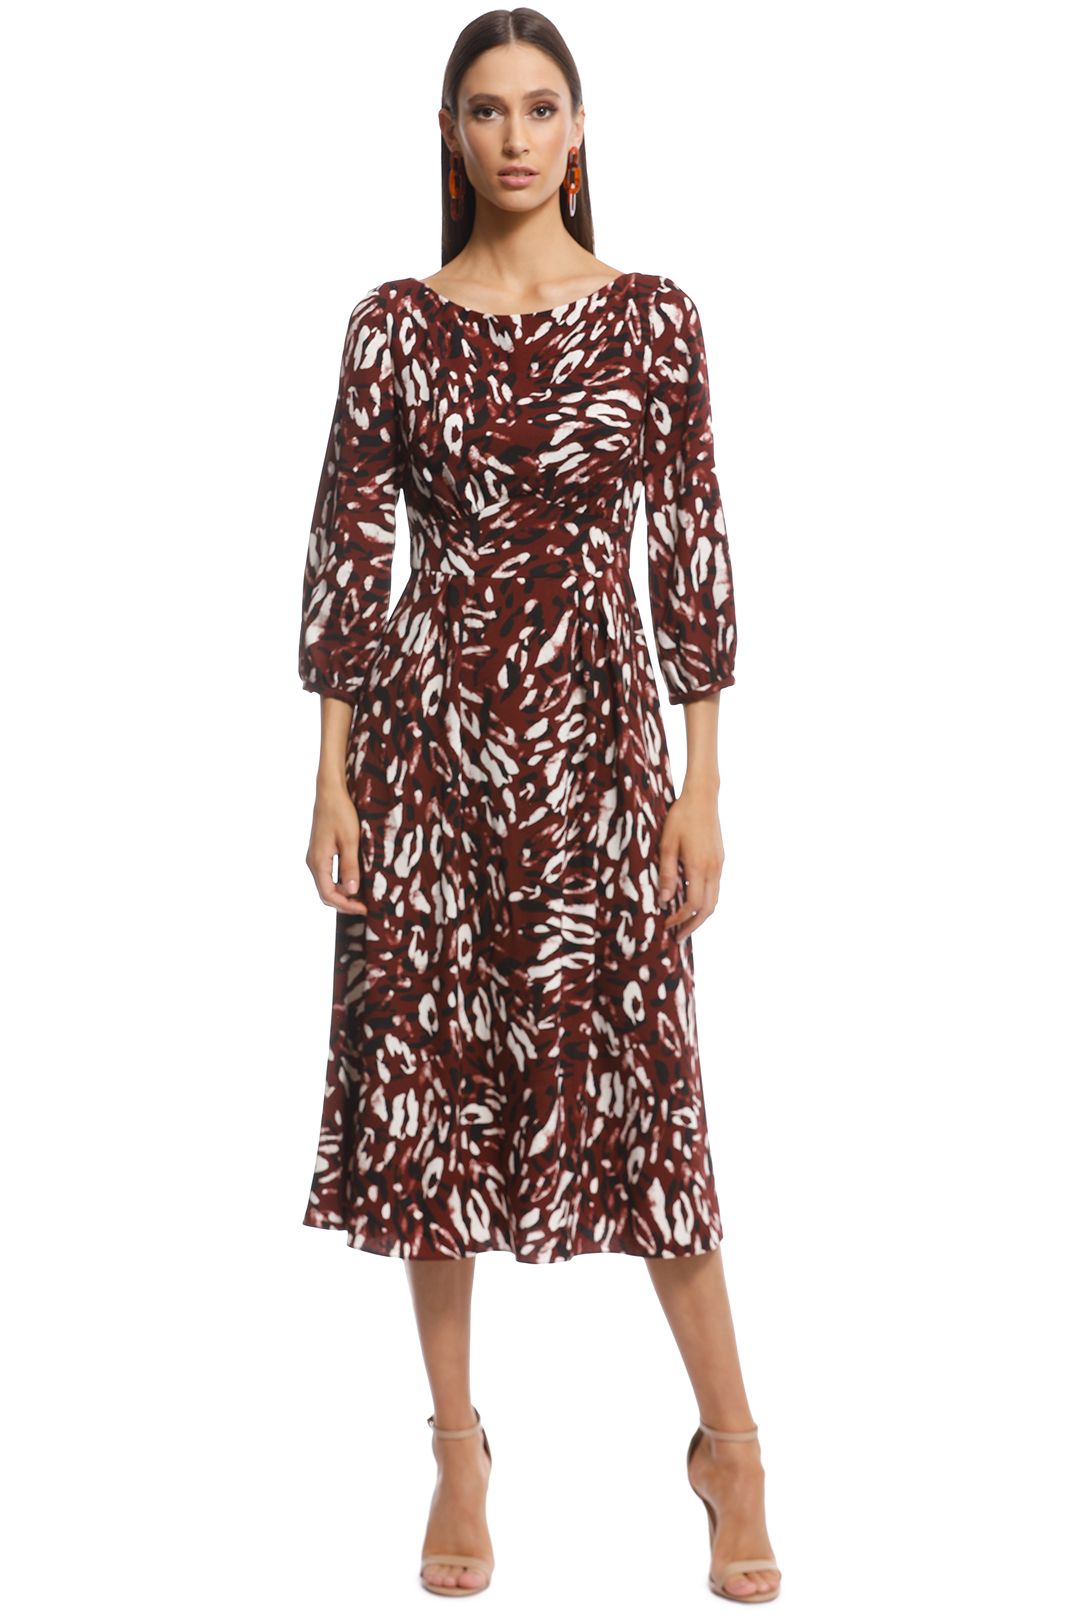 Cue - Abstract Leopard Boat Neck Dress - Burgundy - Front